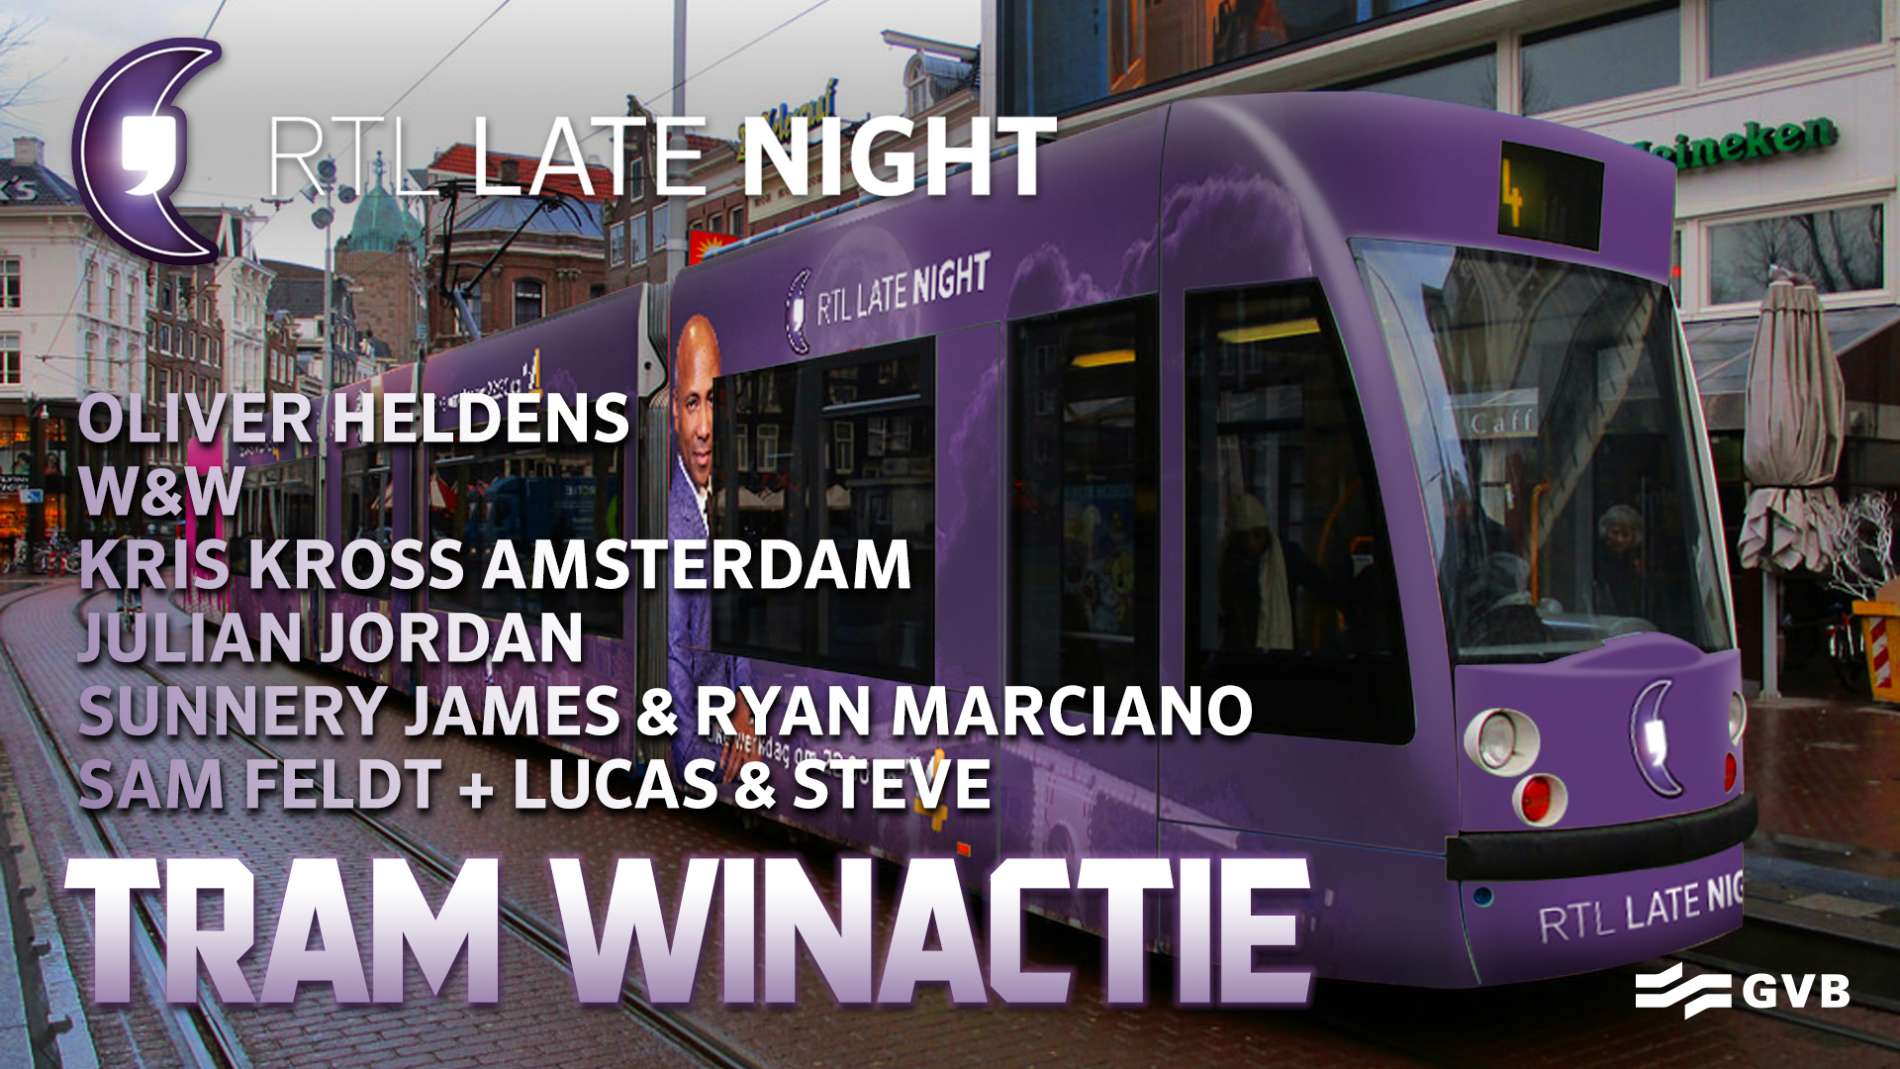 Join the Spinnin' DJ's in an Amsterdam tram